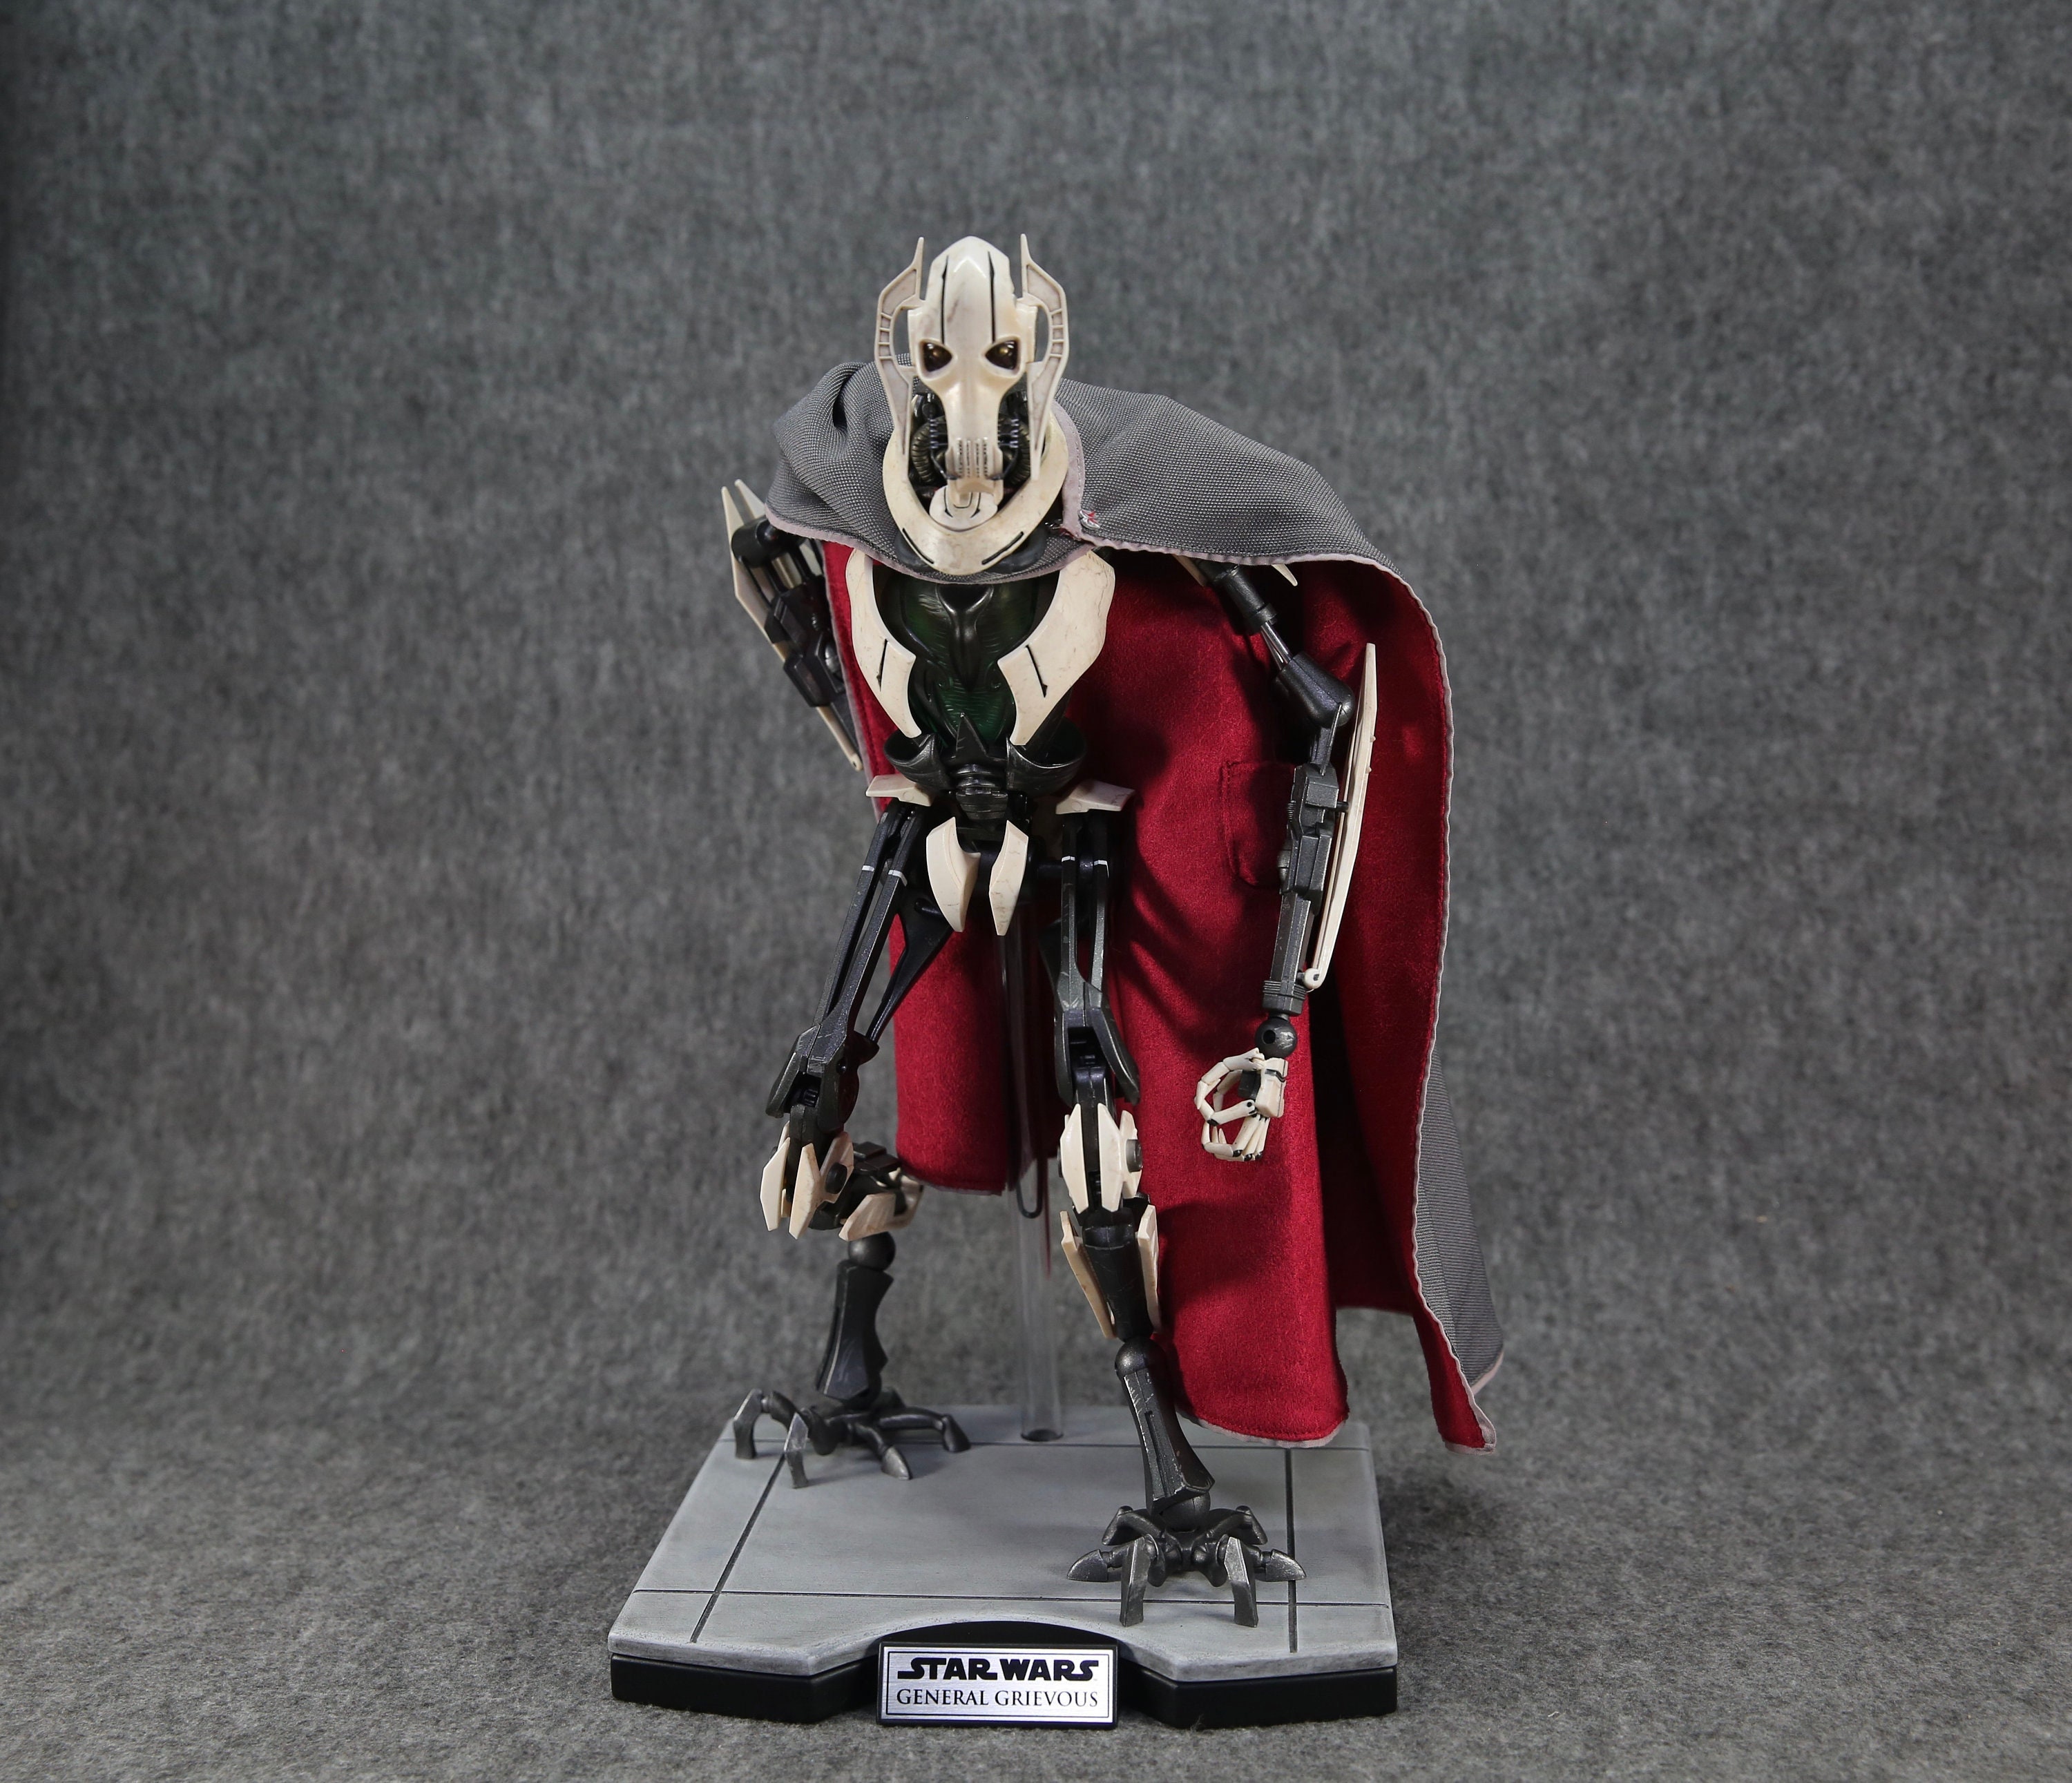 STAR WARS DEAGOSTINI HAND PAINTED 1:24 CHESS PIECE - GENERAL GRIEVOUS NOS  2013